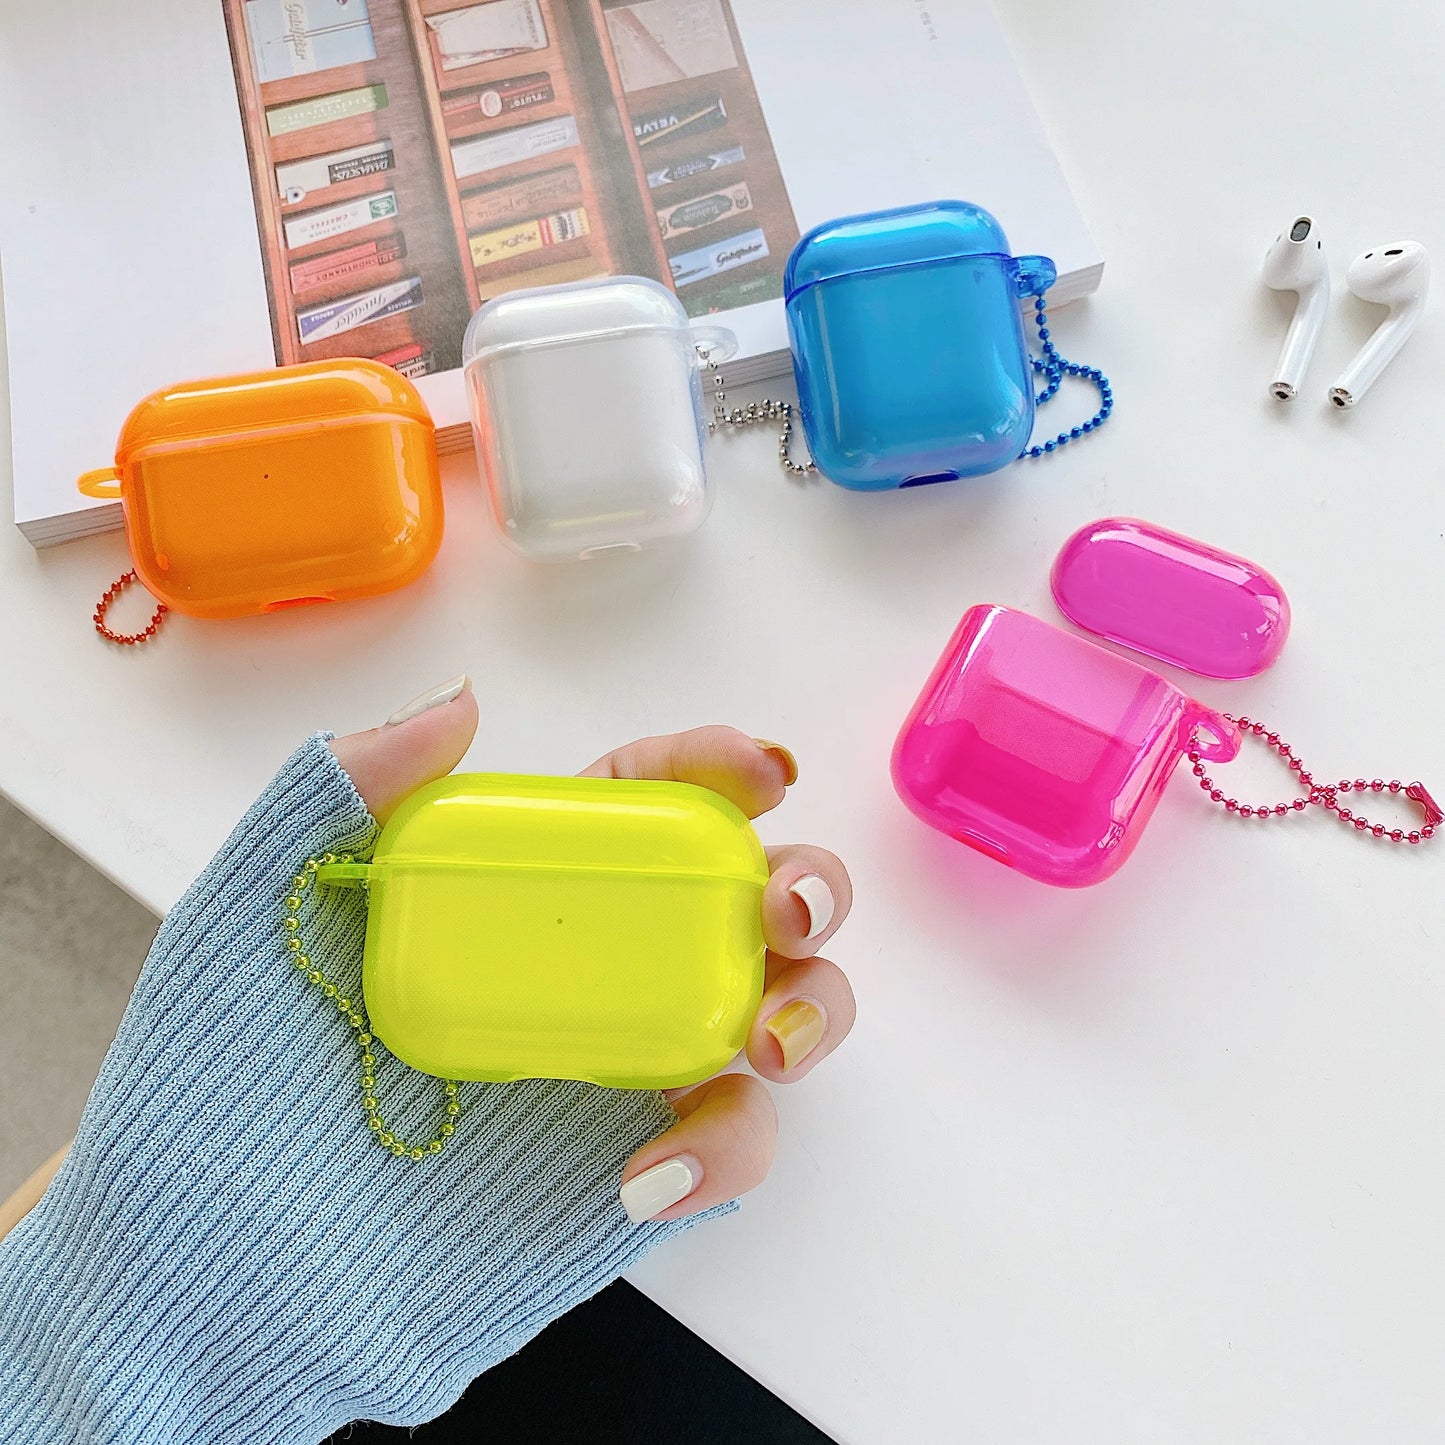 iPhone/Airpods Neon Silicone Case